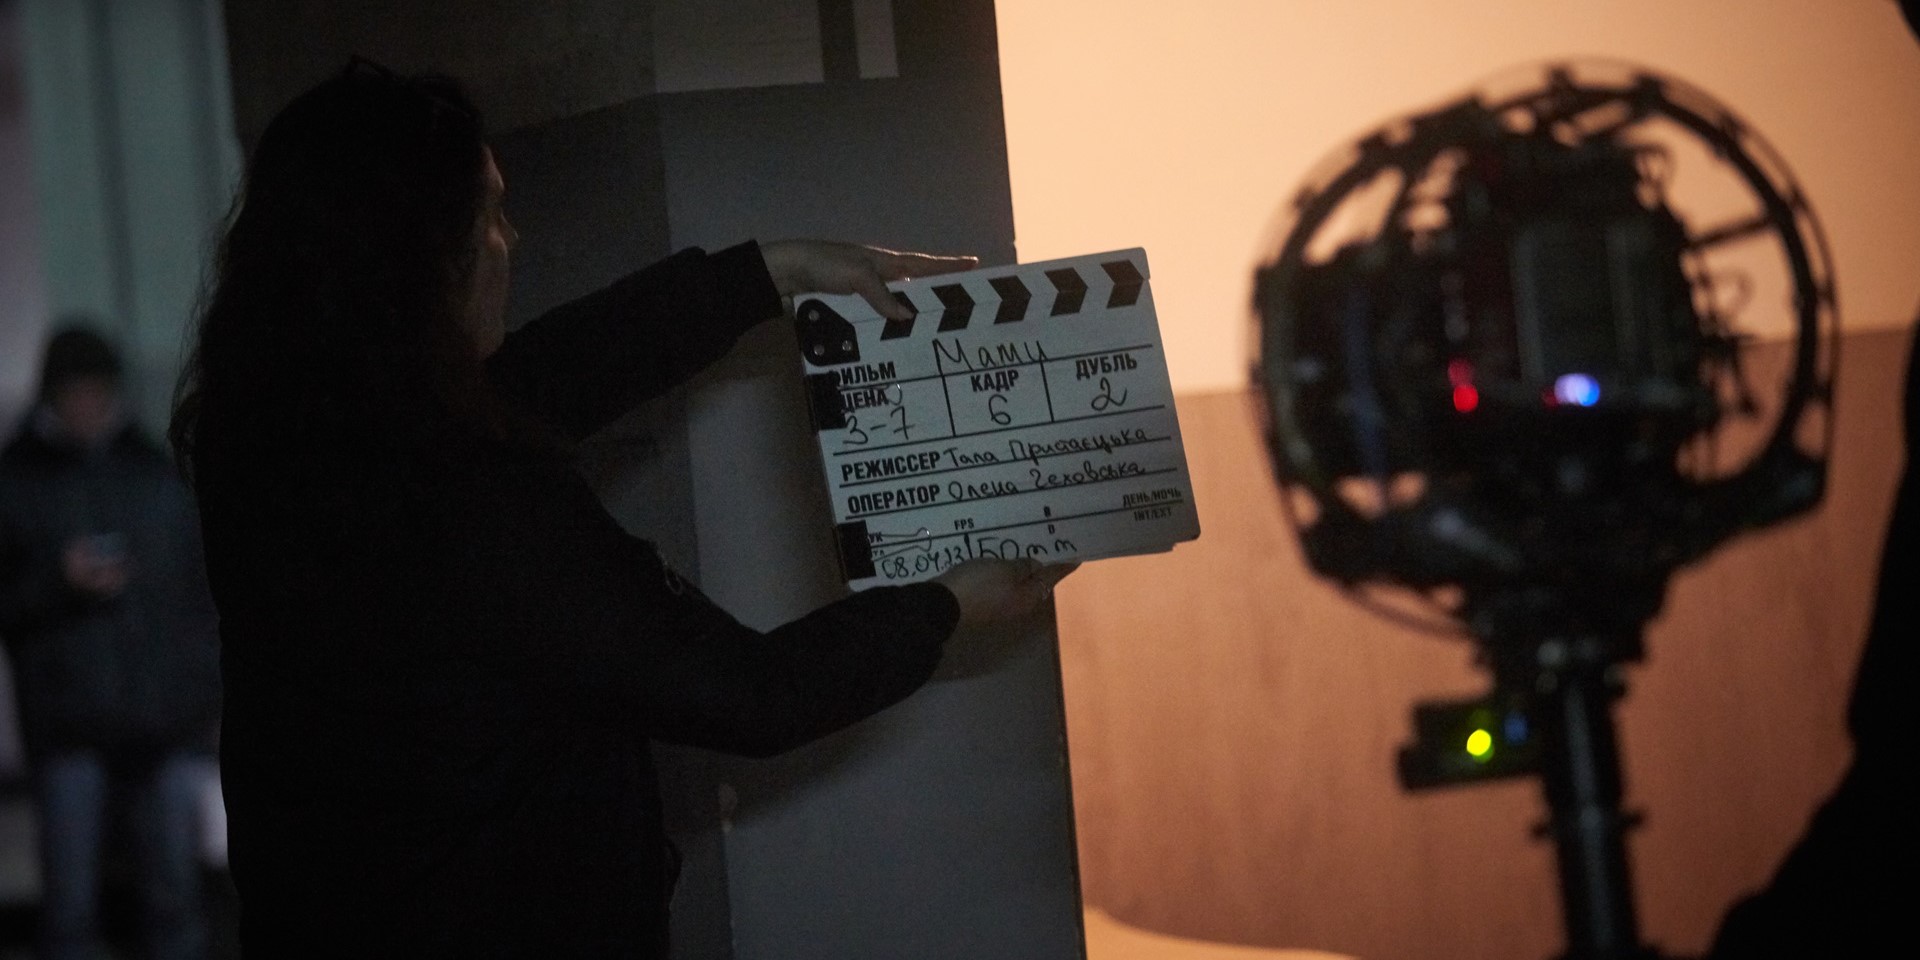 Behind the scenes of the Ukrainian drama series, Those Who Stayed. A woman stands with her back to the photographer, holding a clapper board, as they prepare to film an episode.